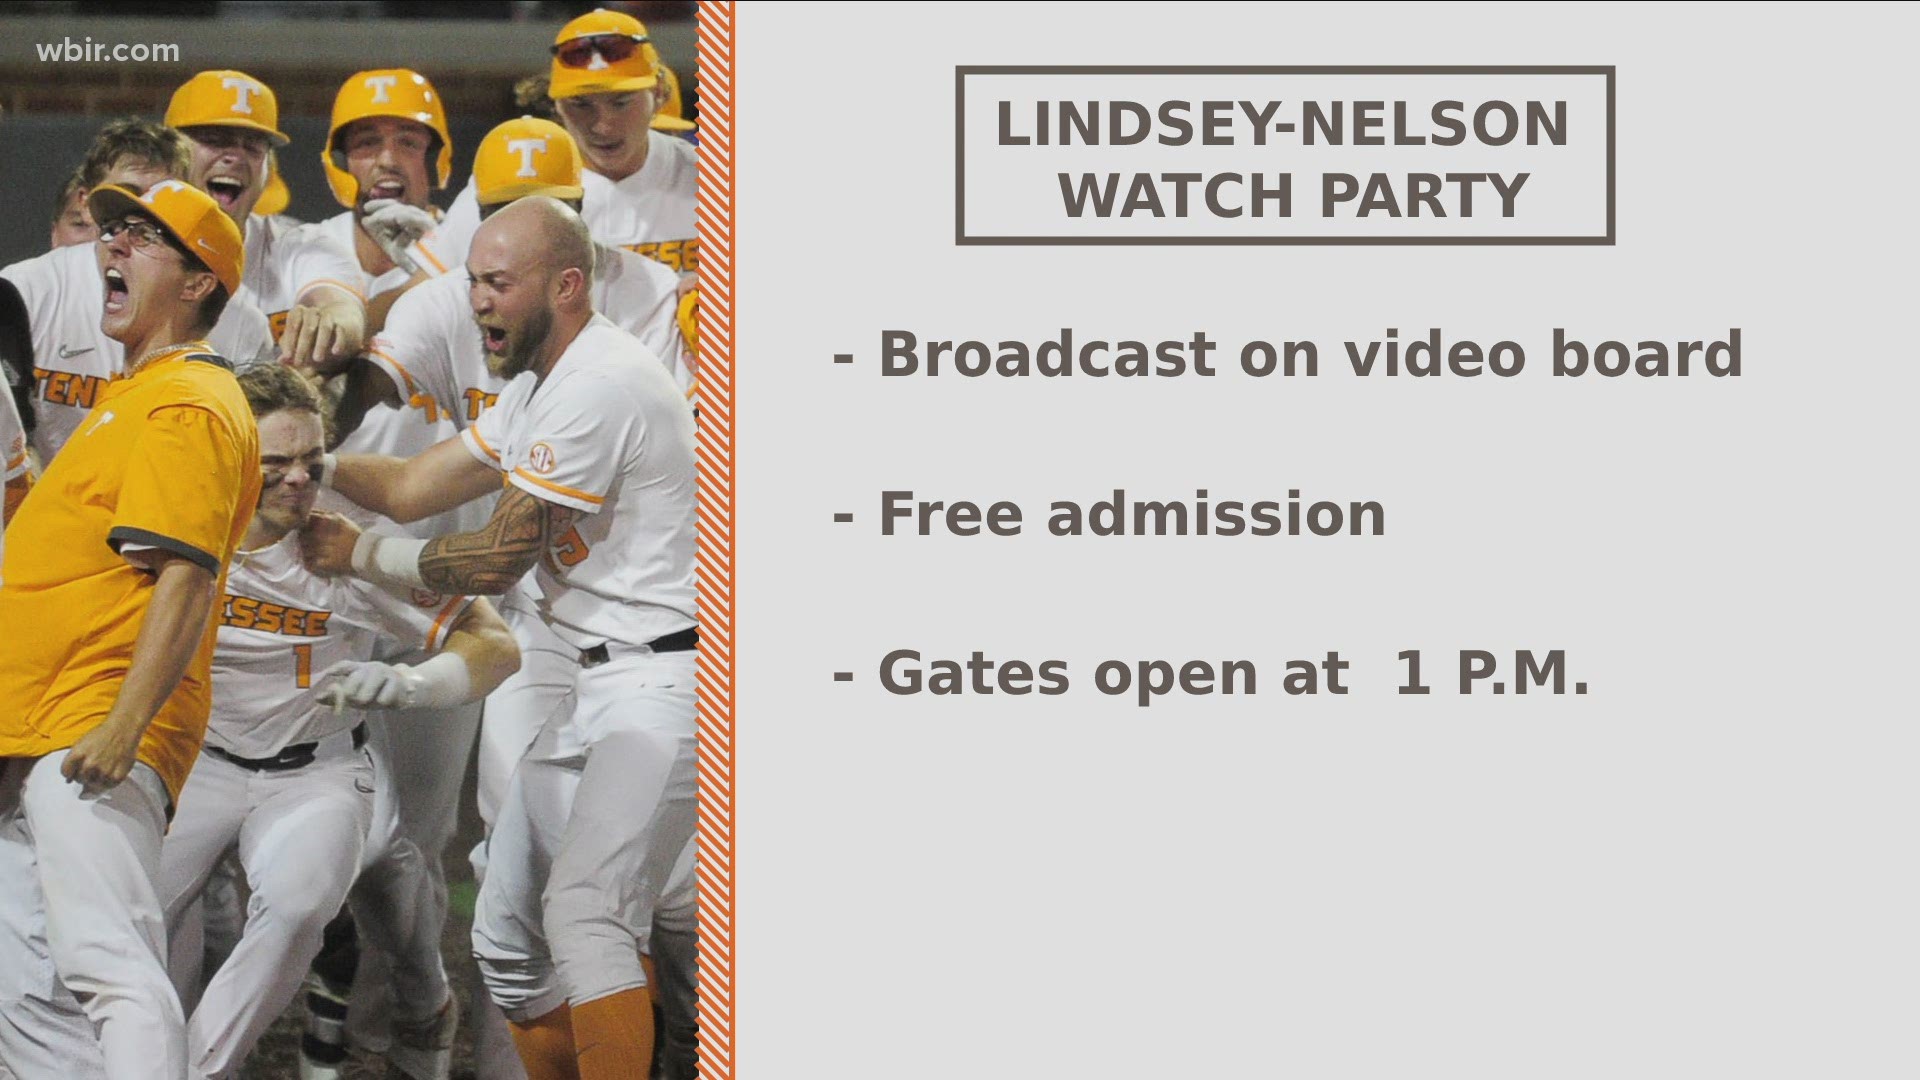 Here is a way Vol fans can watch the College World Series game without going to Omaha.